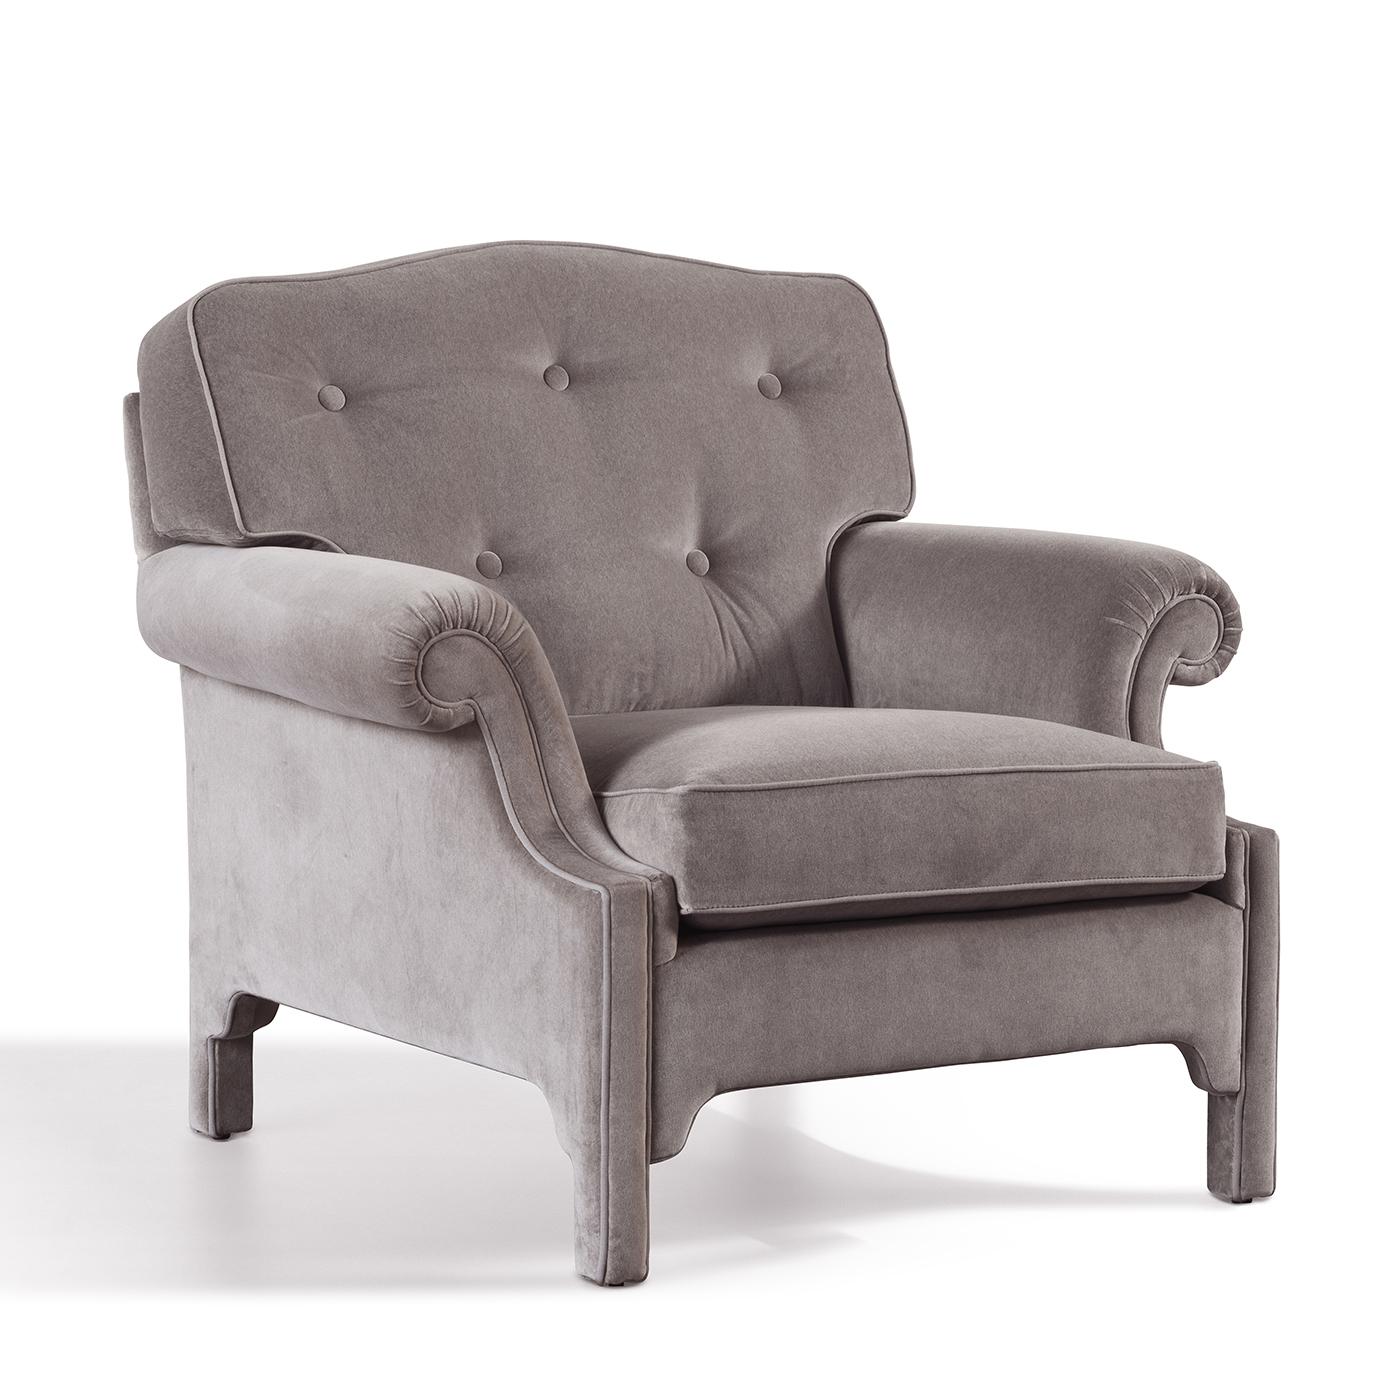 Old-fashioned glamour and exquisite craftsmanship create a stunning piece of functional decor that is both elegantly decorative and comfortably functional. The structure in solid wood features a generous seat, reclined back, and curved, welcoming